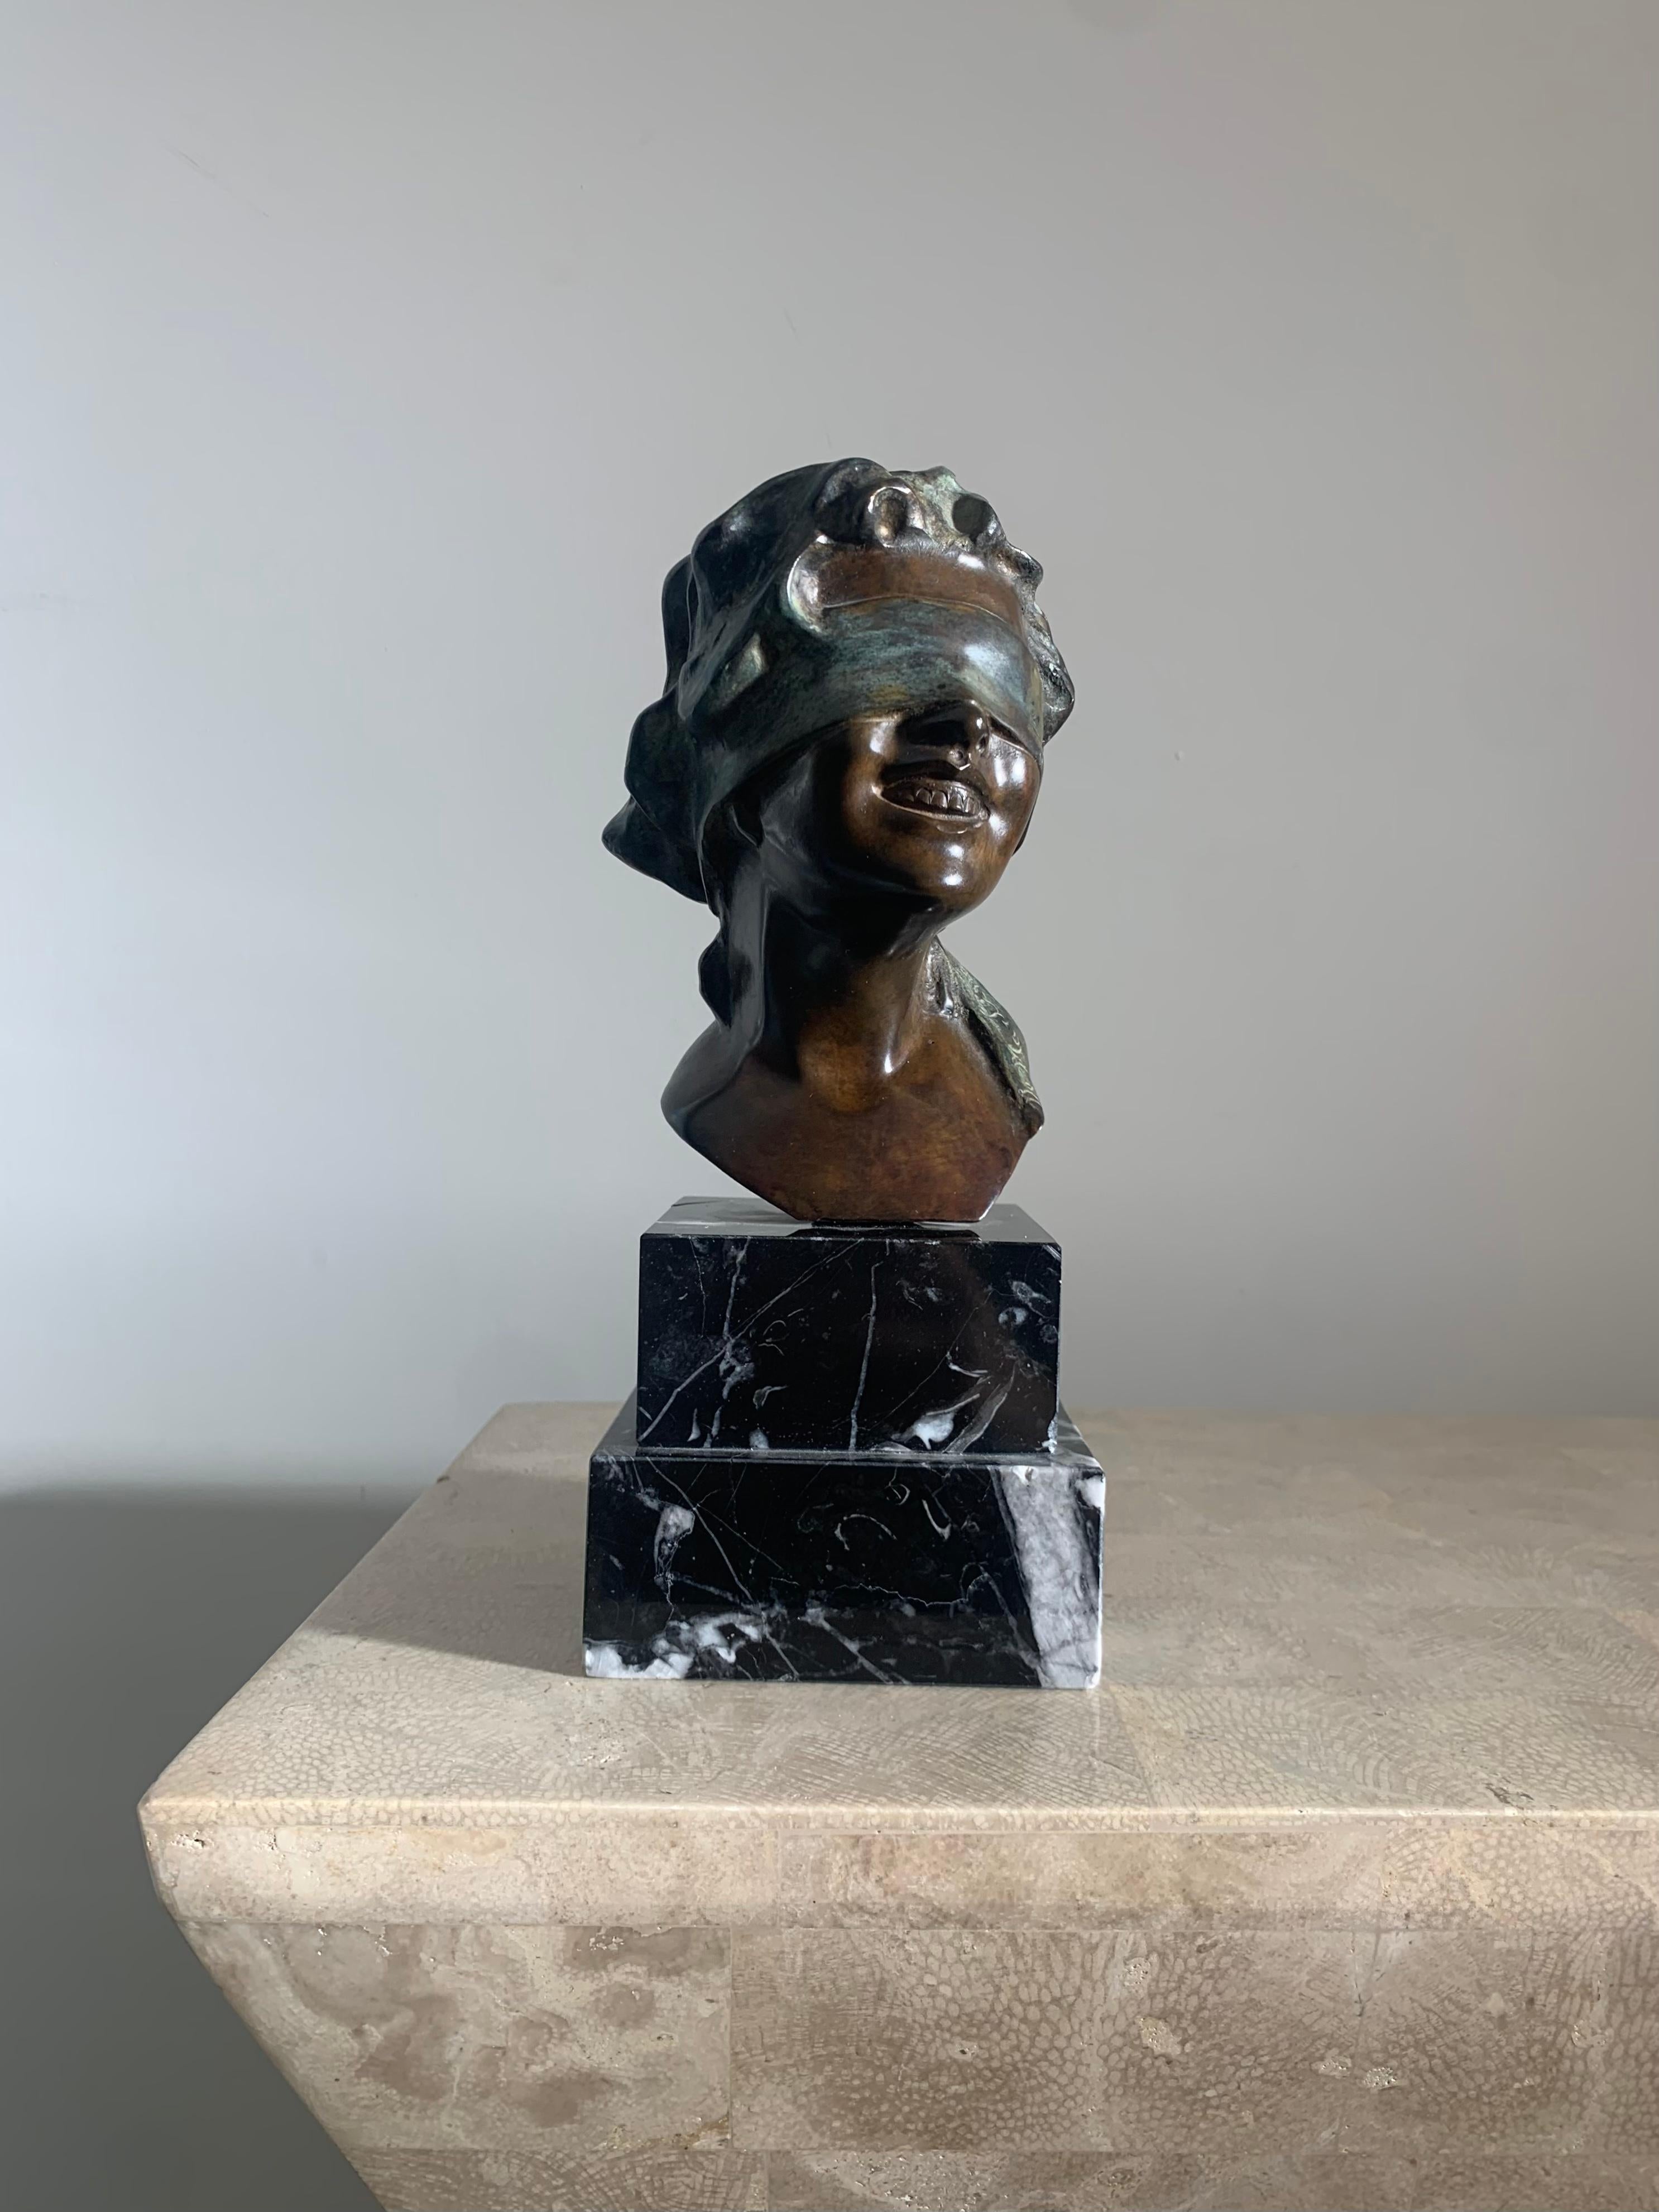 A baroque revival vintage Italian cast bronze sculpture of a blindfolded woman or goddess, circa 1960s or 1970s. Hand-carved in Naples and signed « V. Salomone, Napoli 23/300 » on the back, and « De Martine » on the side. Mounted on a double noir